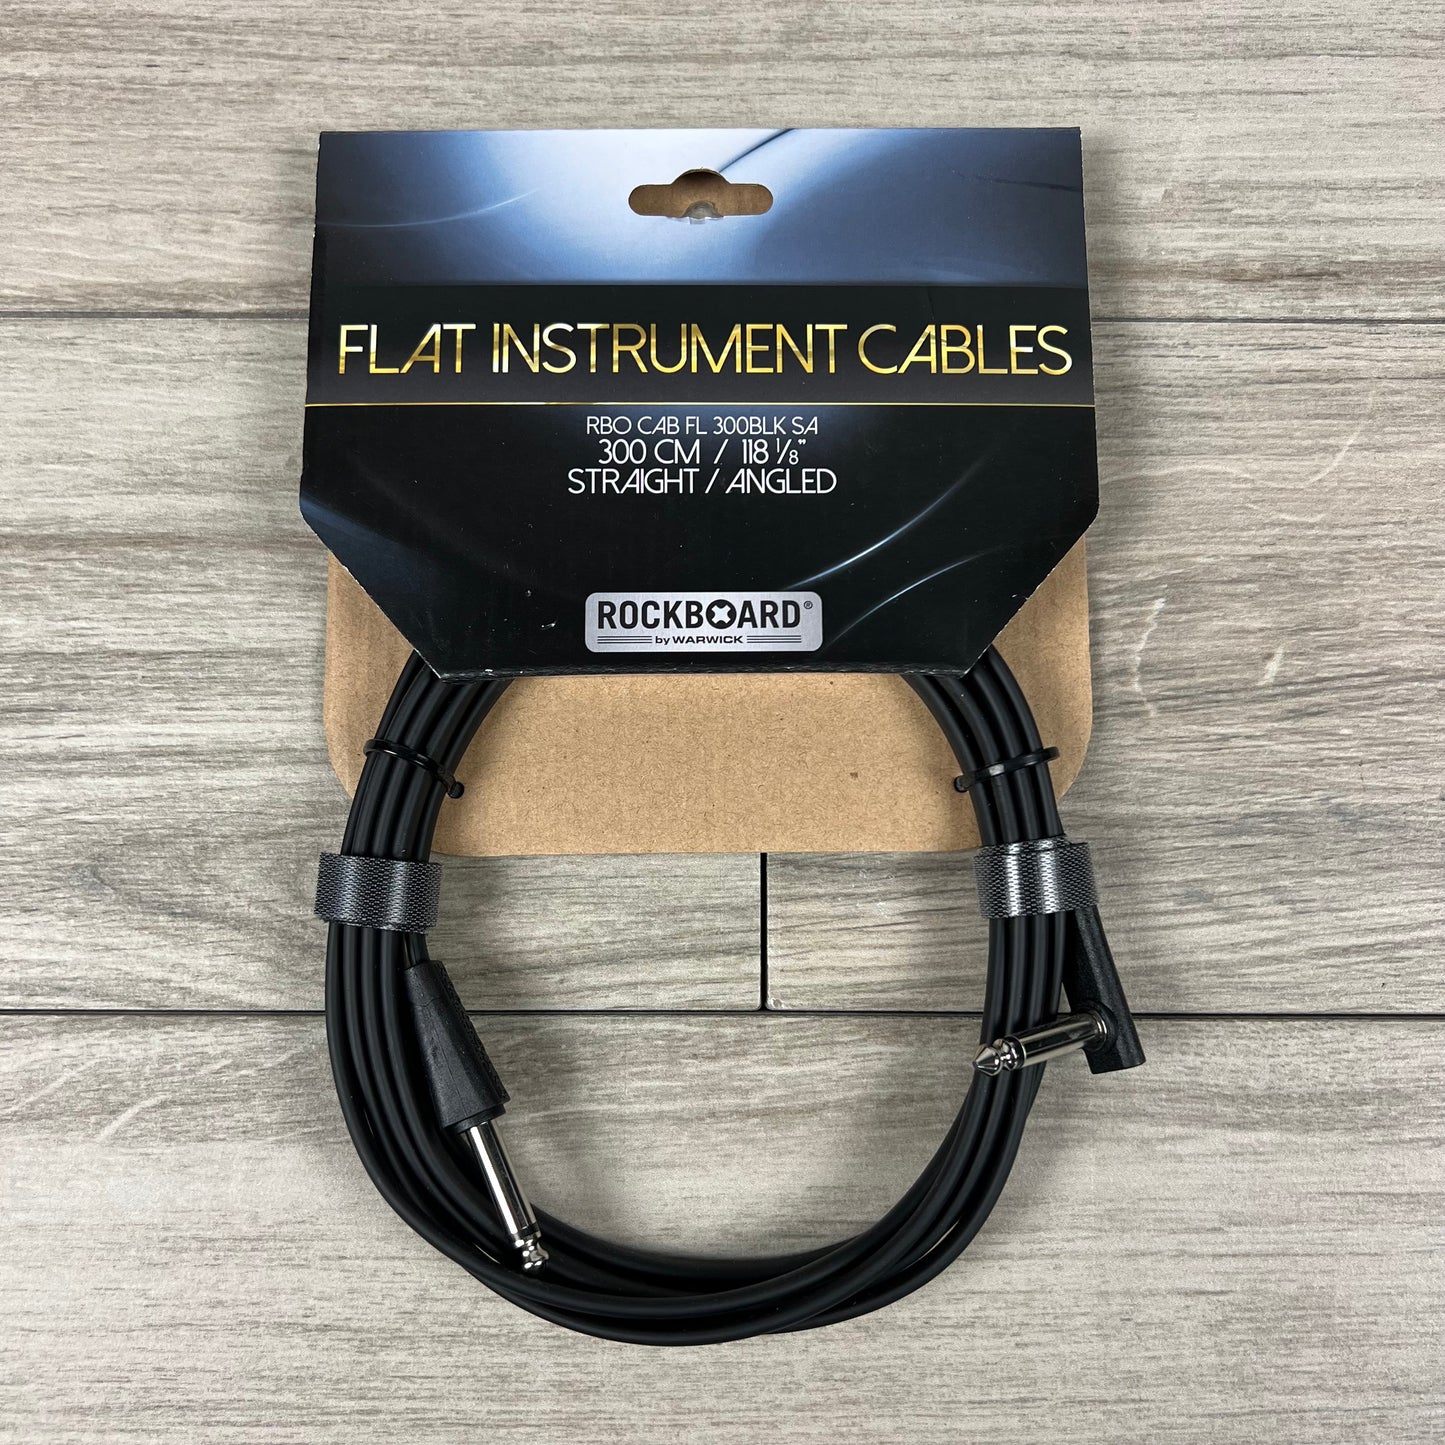 RockBoard Flat Instrument Cable, Straight / Angled, 300 cm / 118-7/64"